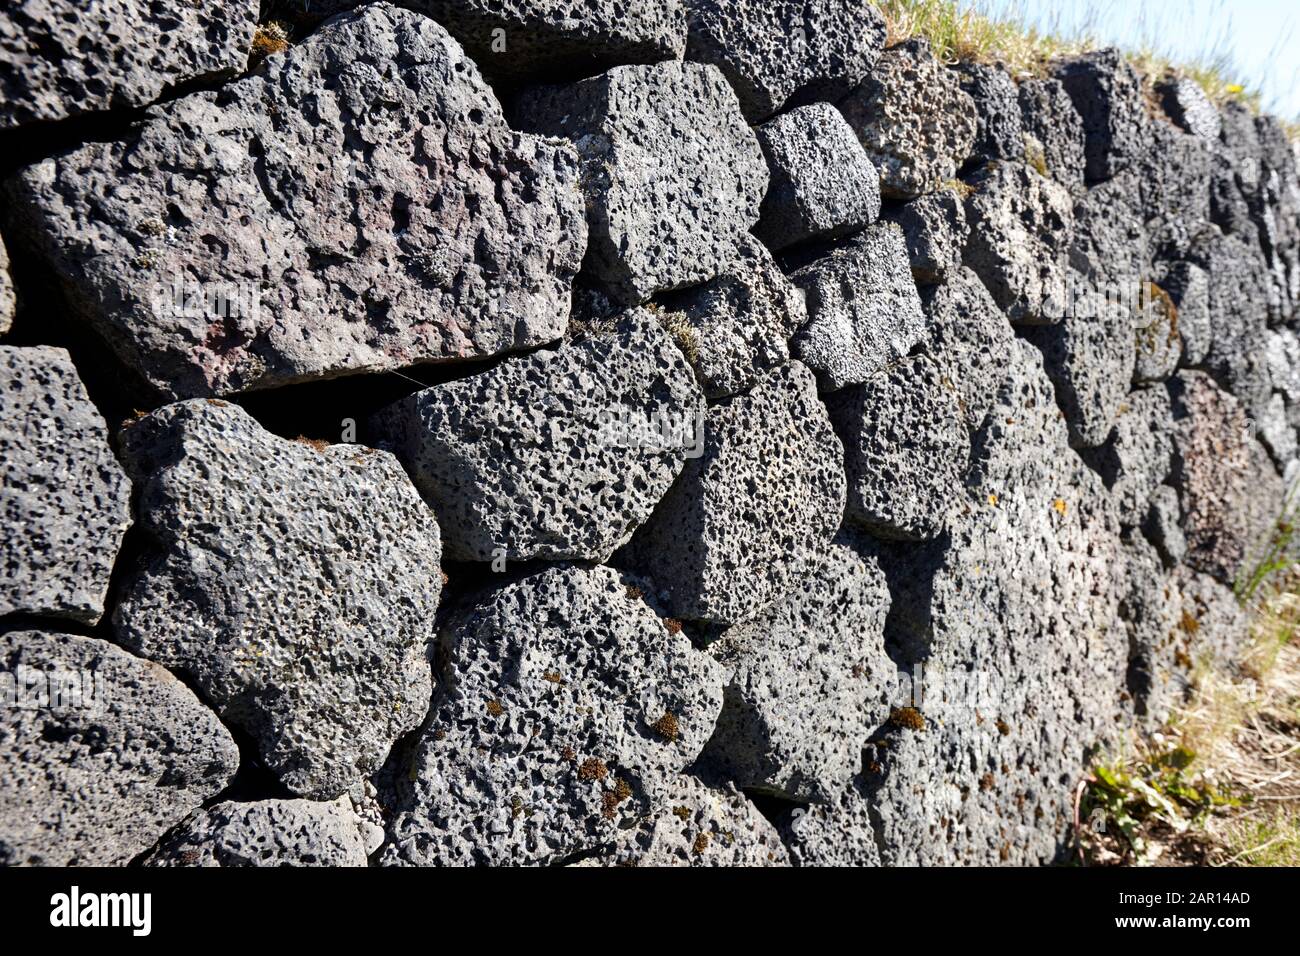 dry stone wall made of volcanic rocks iceland Stock Photo